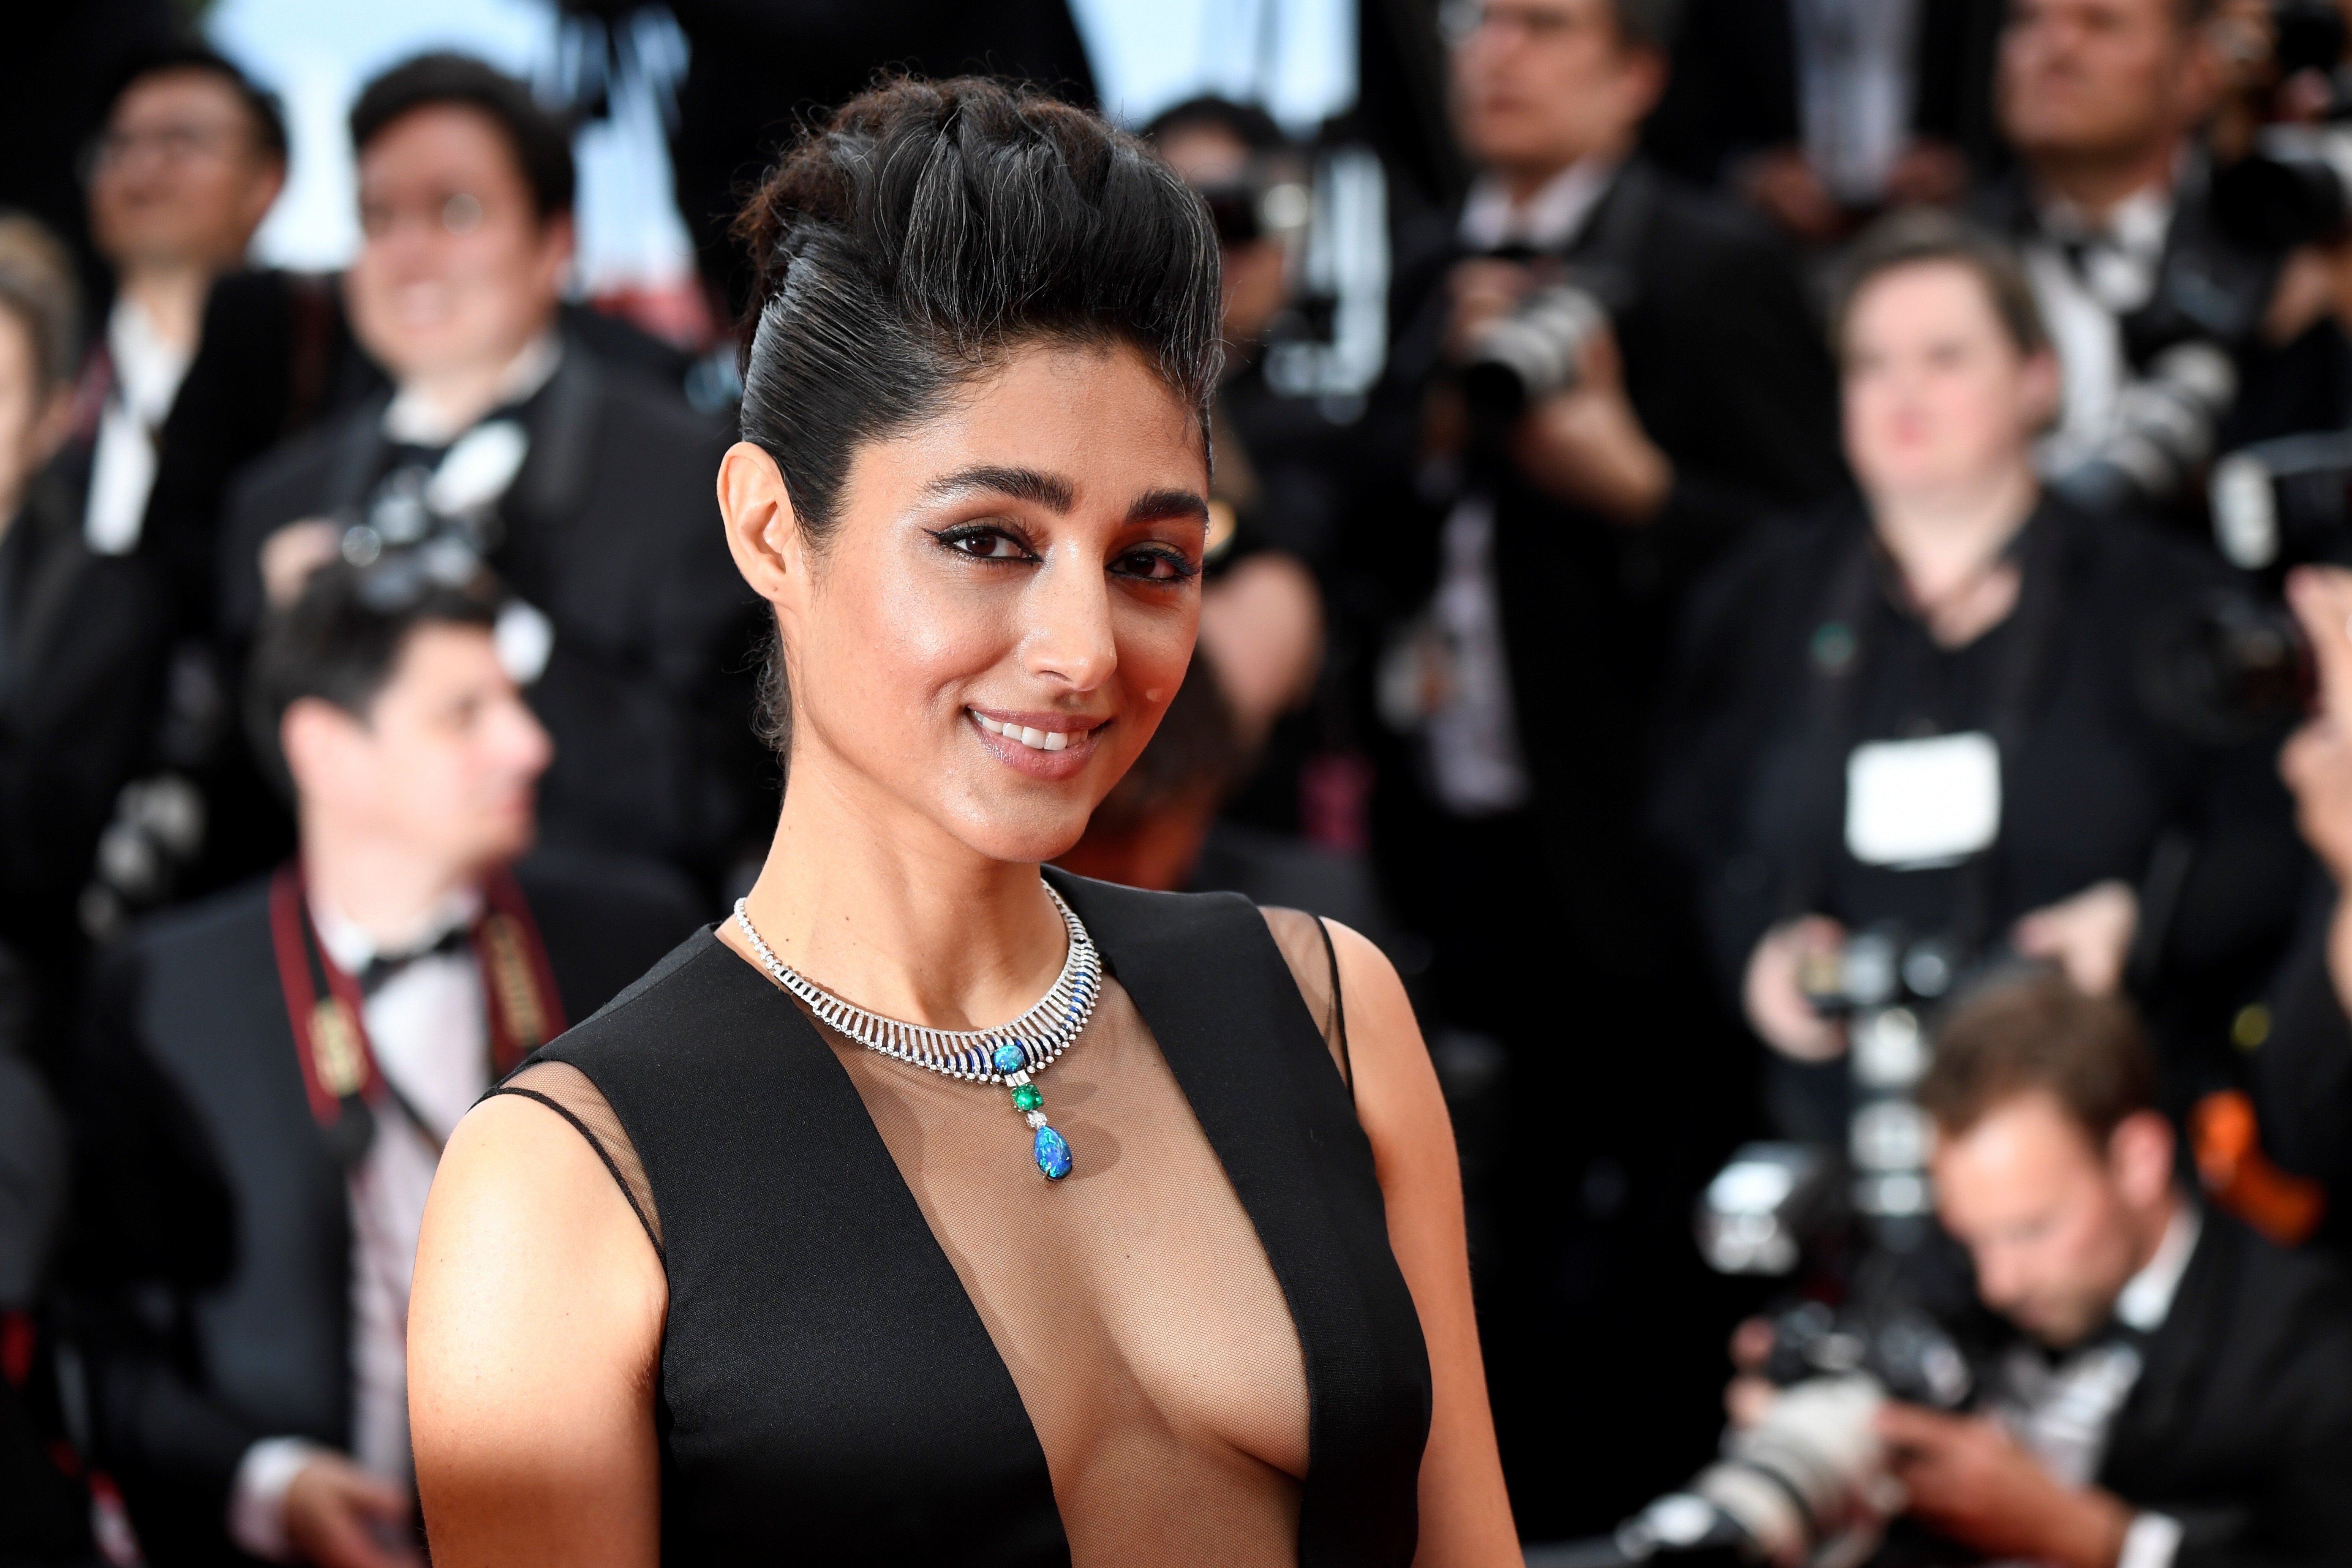 Iranian-born Golshifteh Farahani arrives for the screening of the film The Dead Don’t Die at the Cannes Film Festival in Cannes, France last year. Photo: AFP